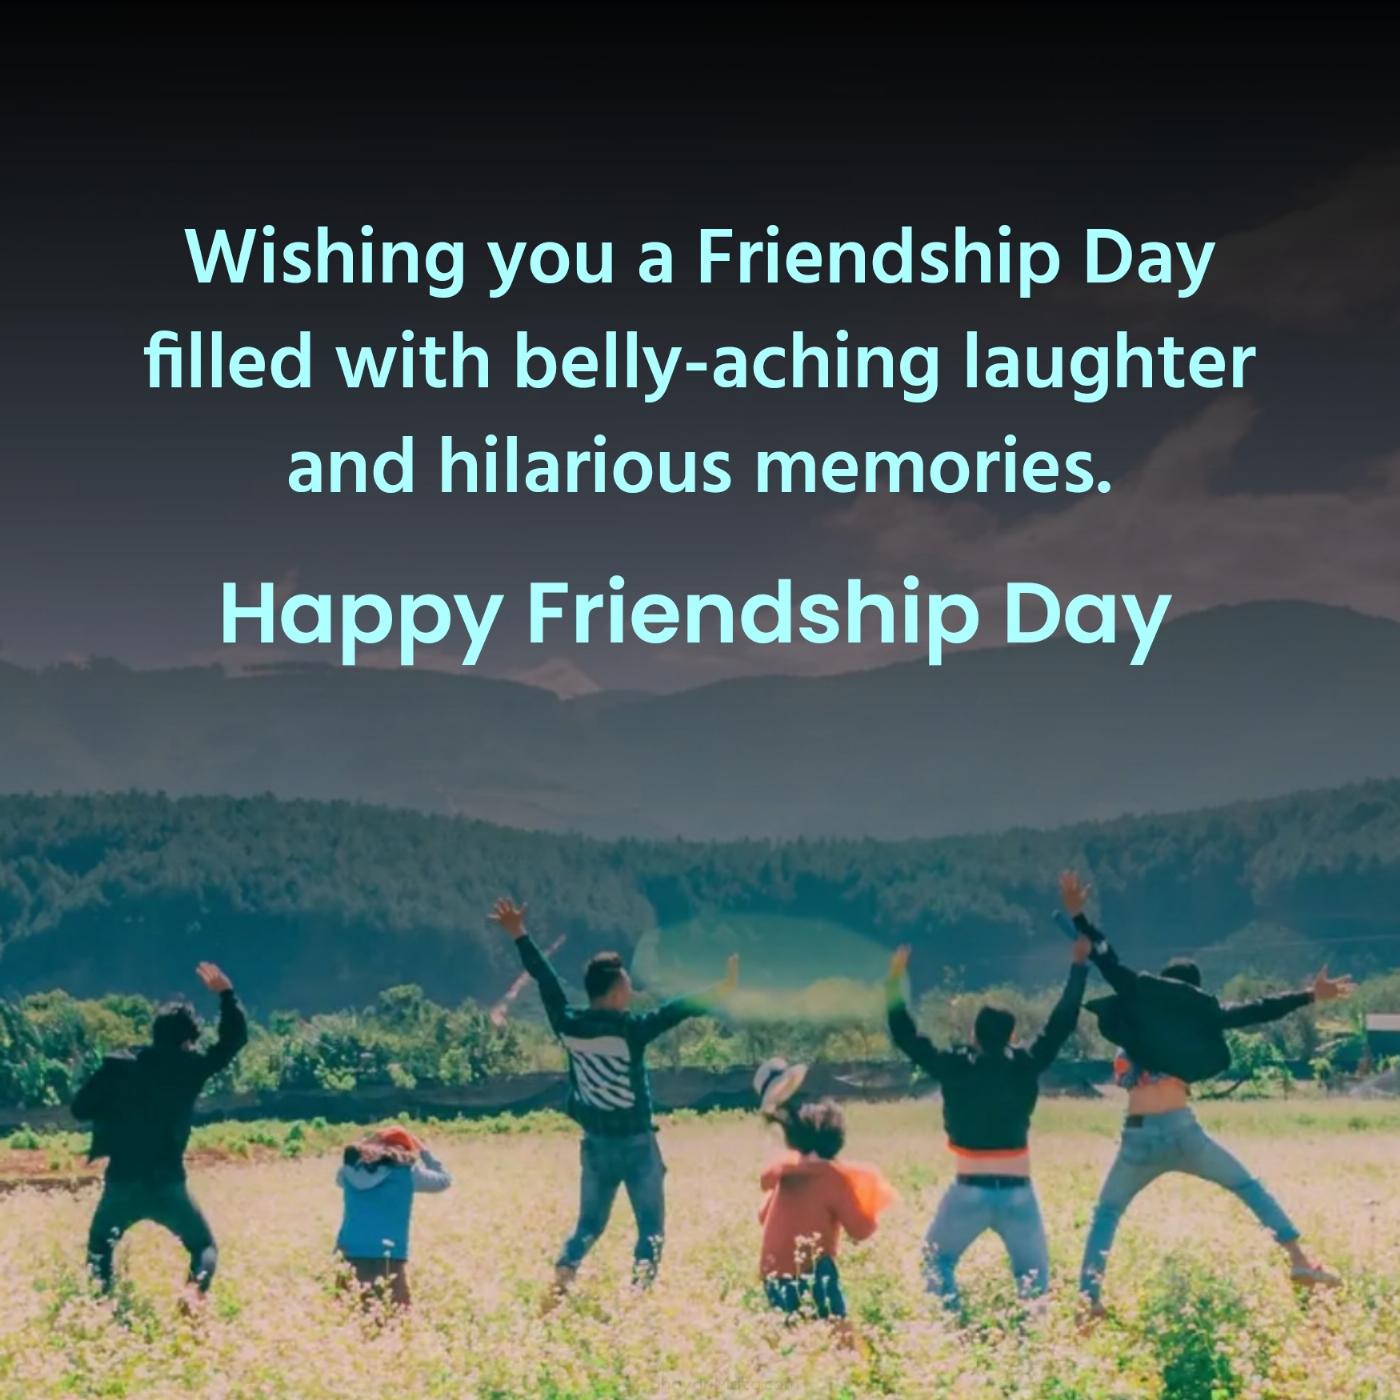 Wishing you a Friendship Day filled with belly-aching laughter